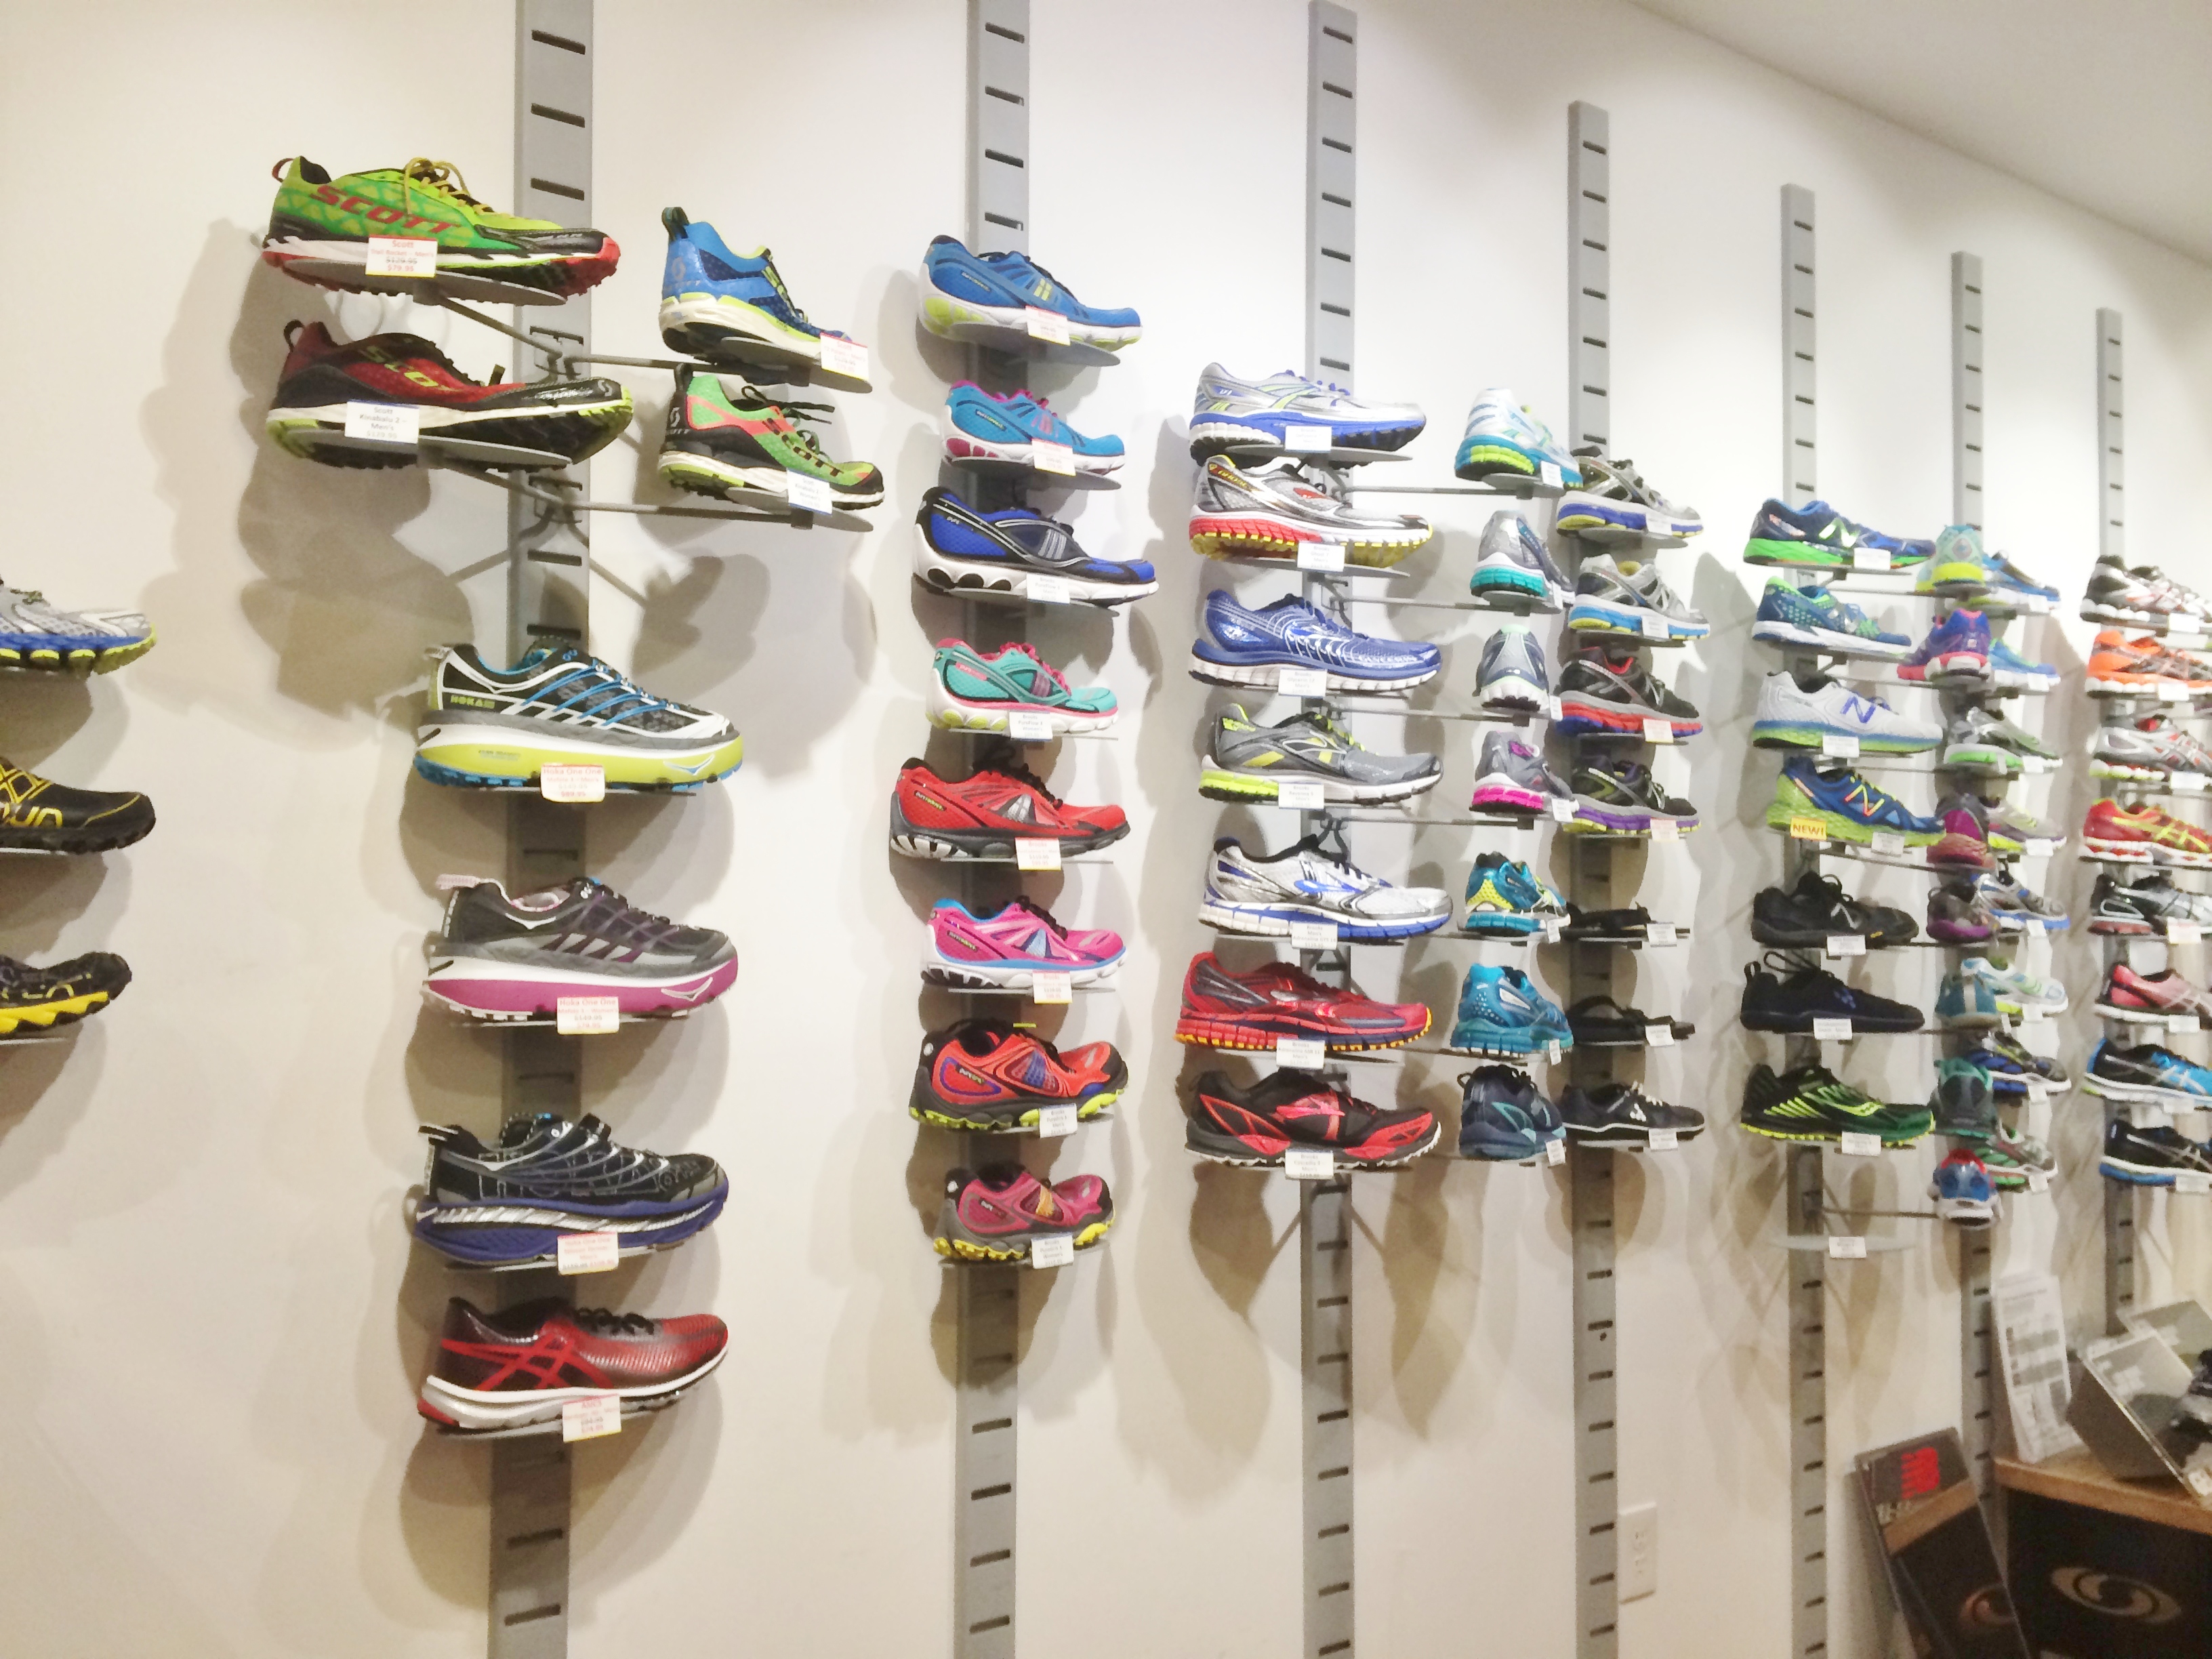 Wall display of running shoes